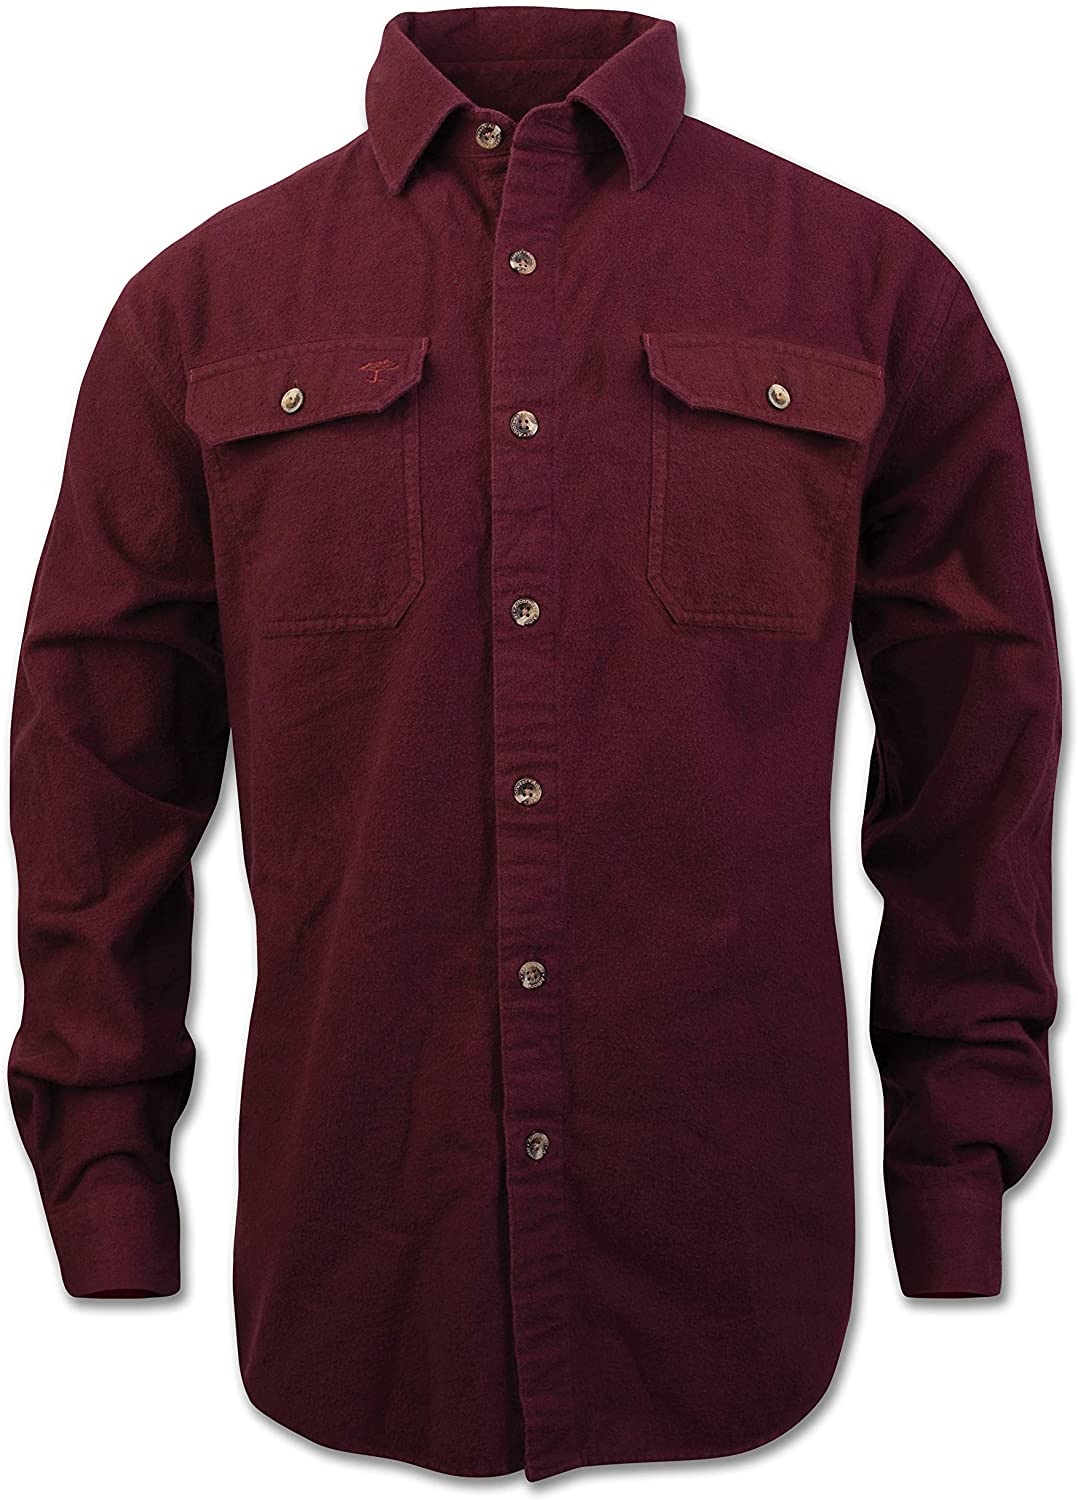 Men's Arborwear Timber Chamois Shirt 100% Cotton, Work – Outdoor Equipped